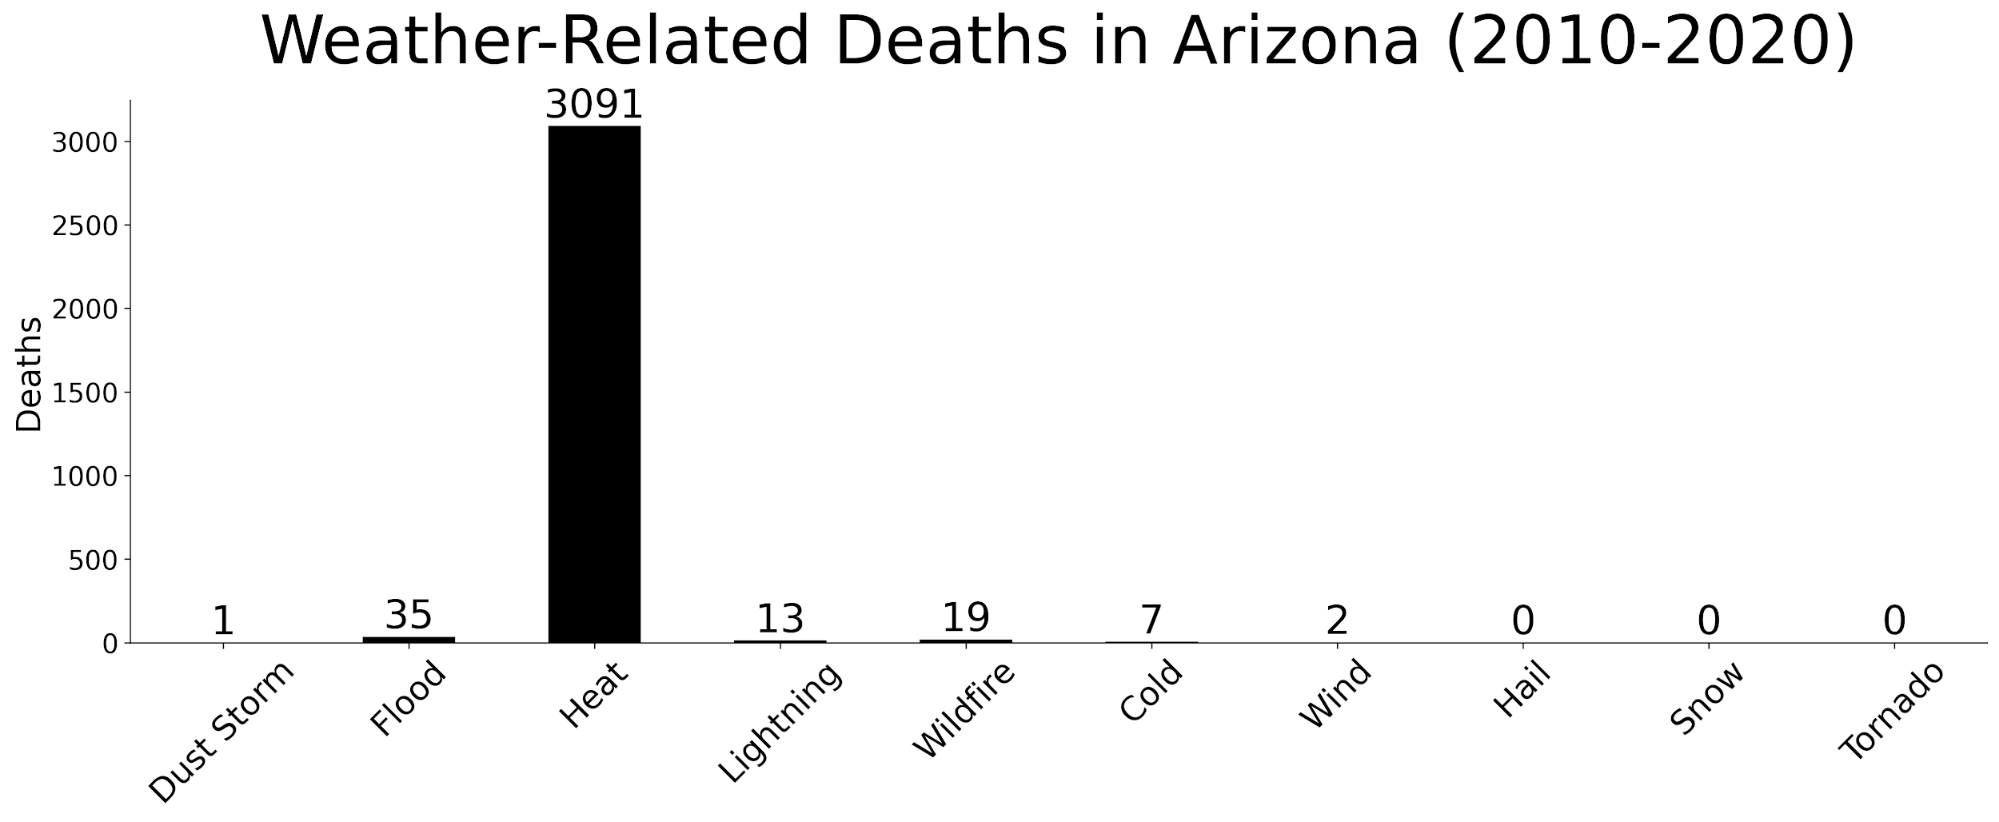 Weather-related deaths in Arizona (2010-2020)